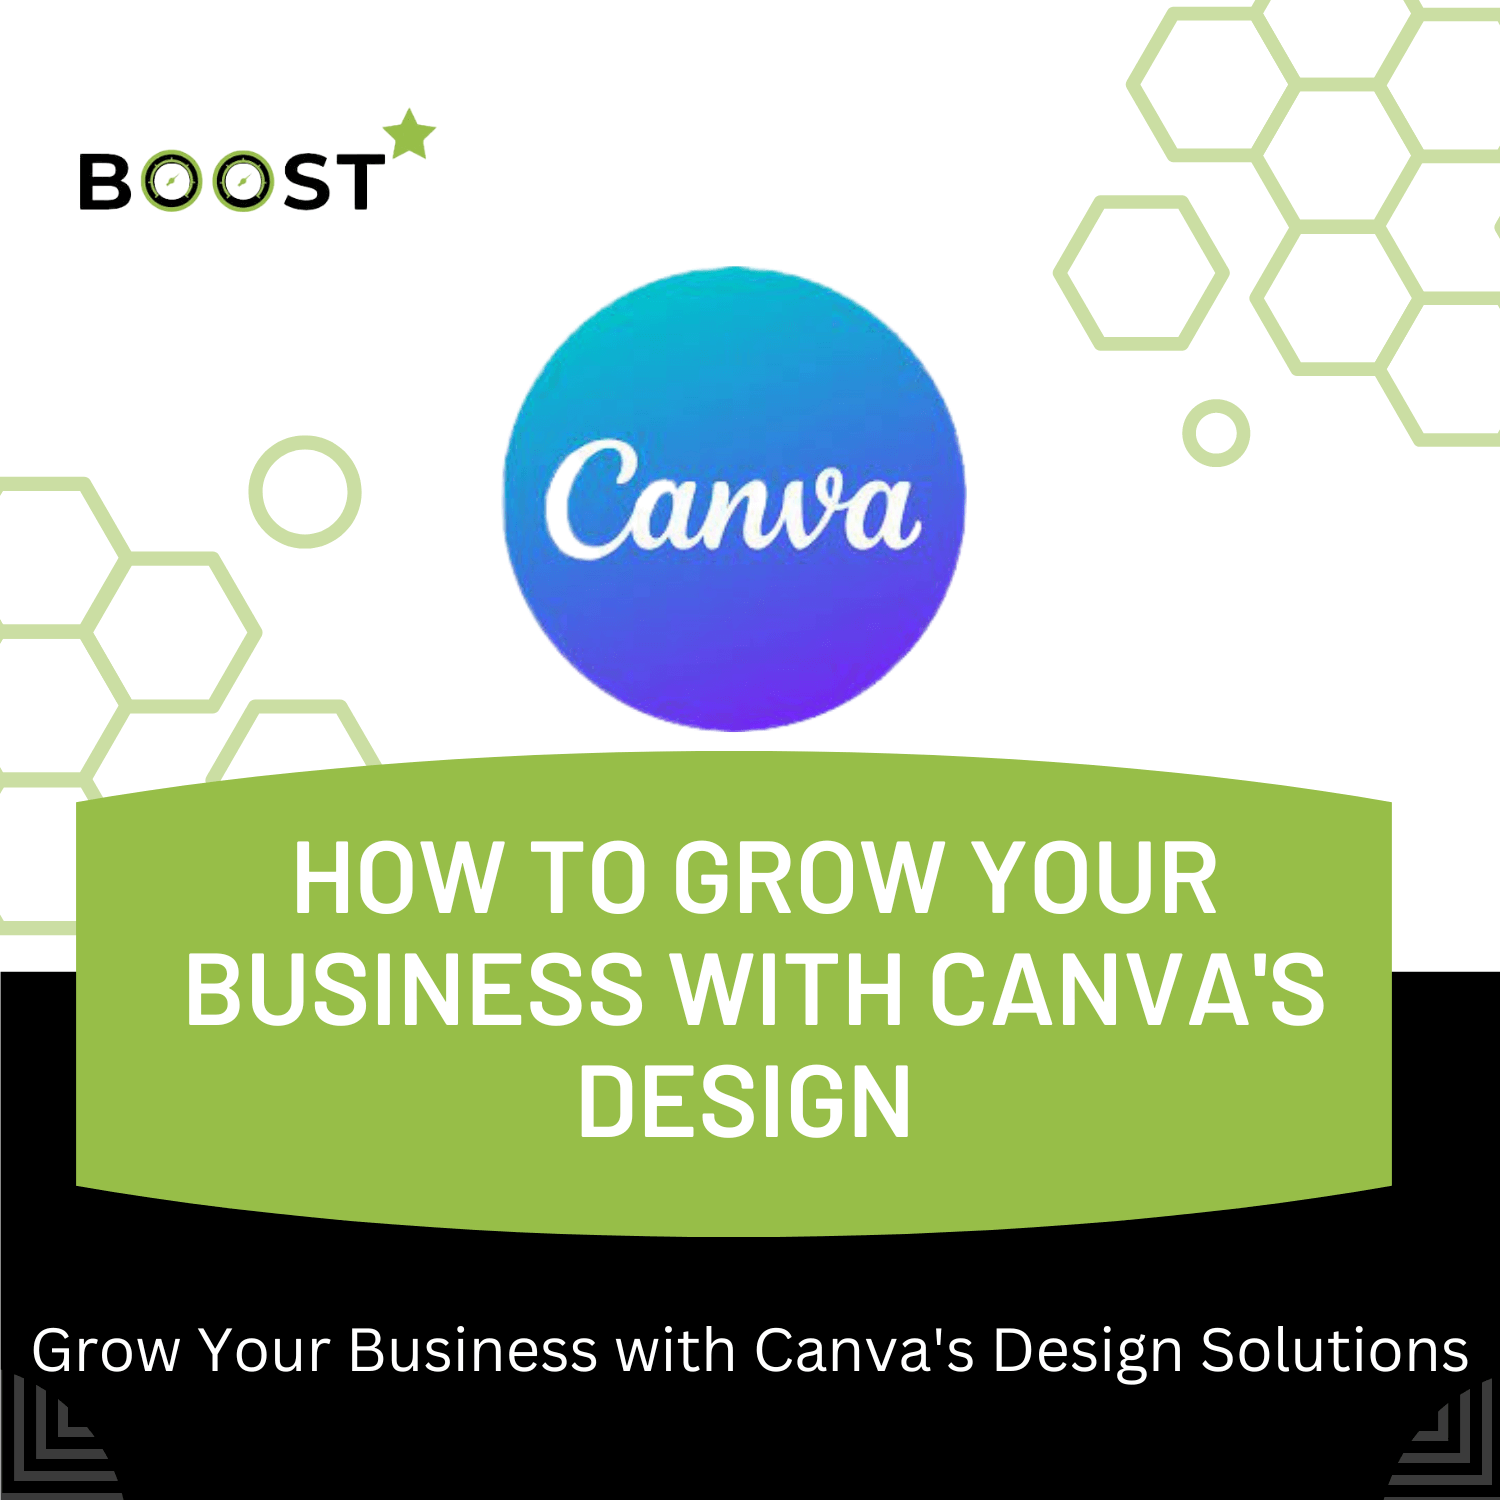 How to Grow Your Business with Canva's Design Solutions